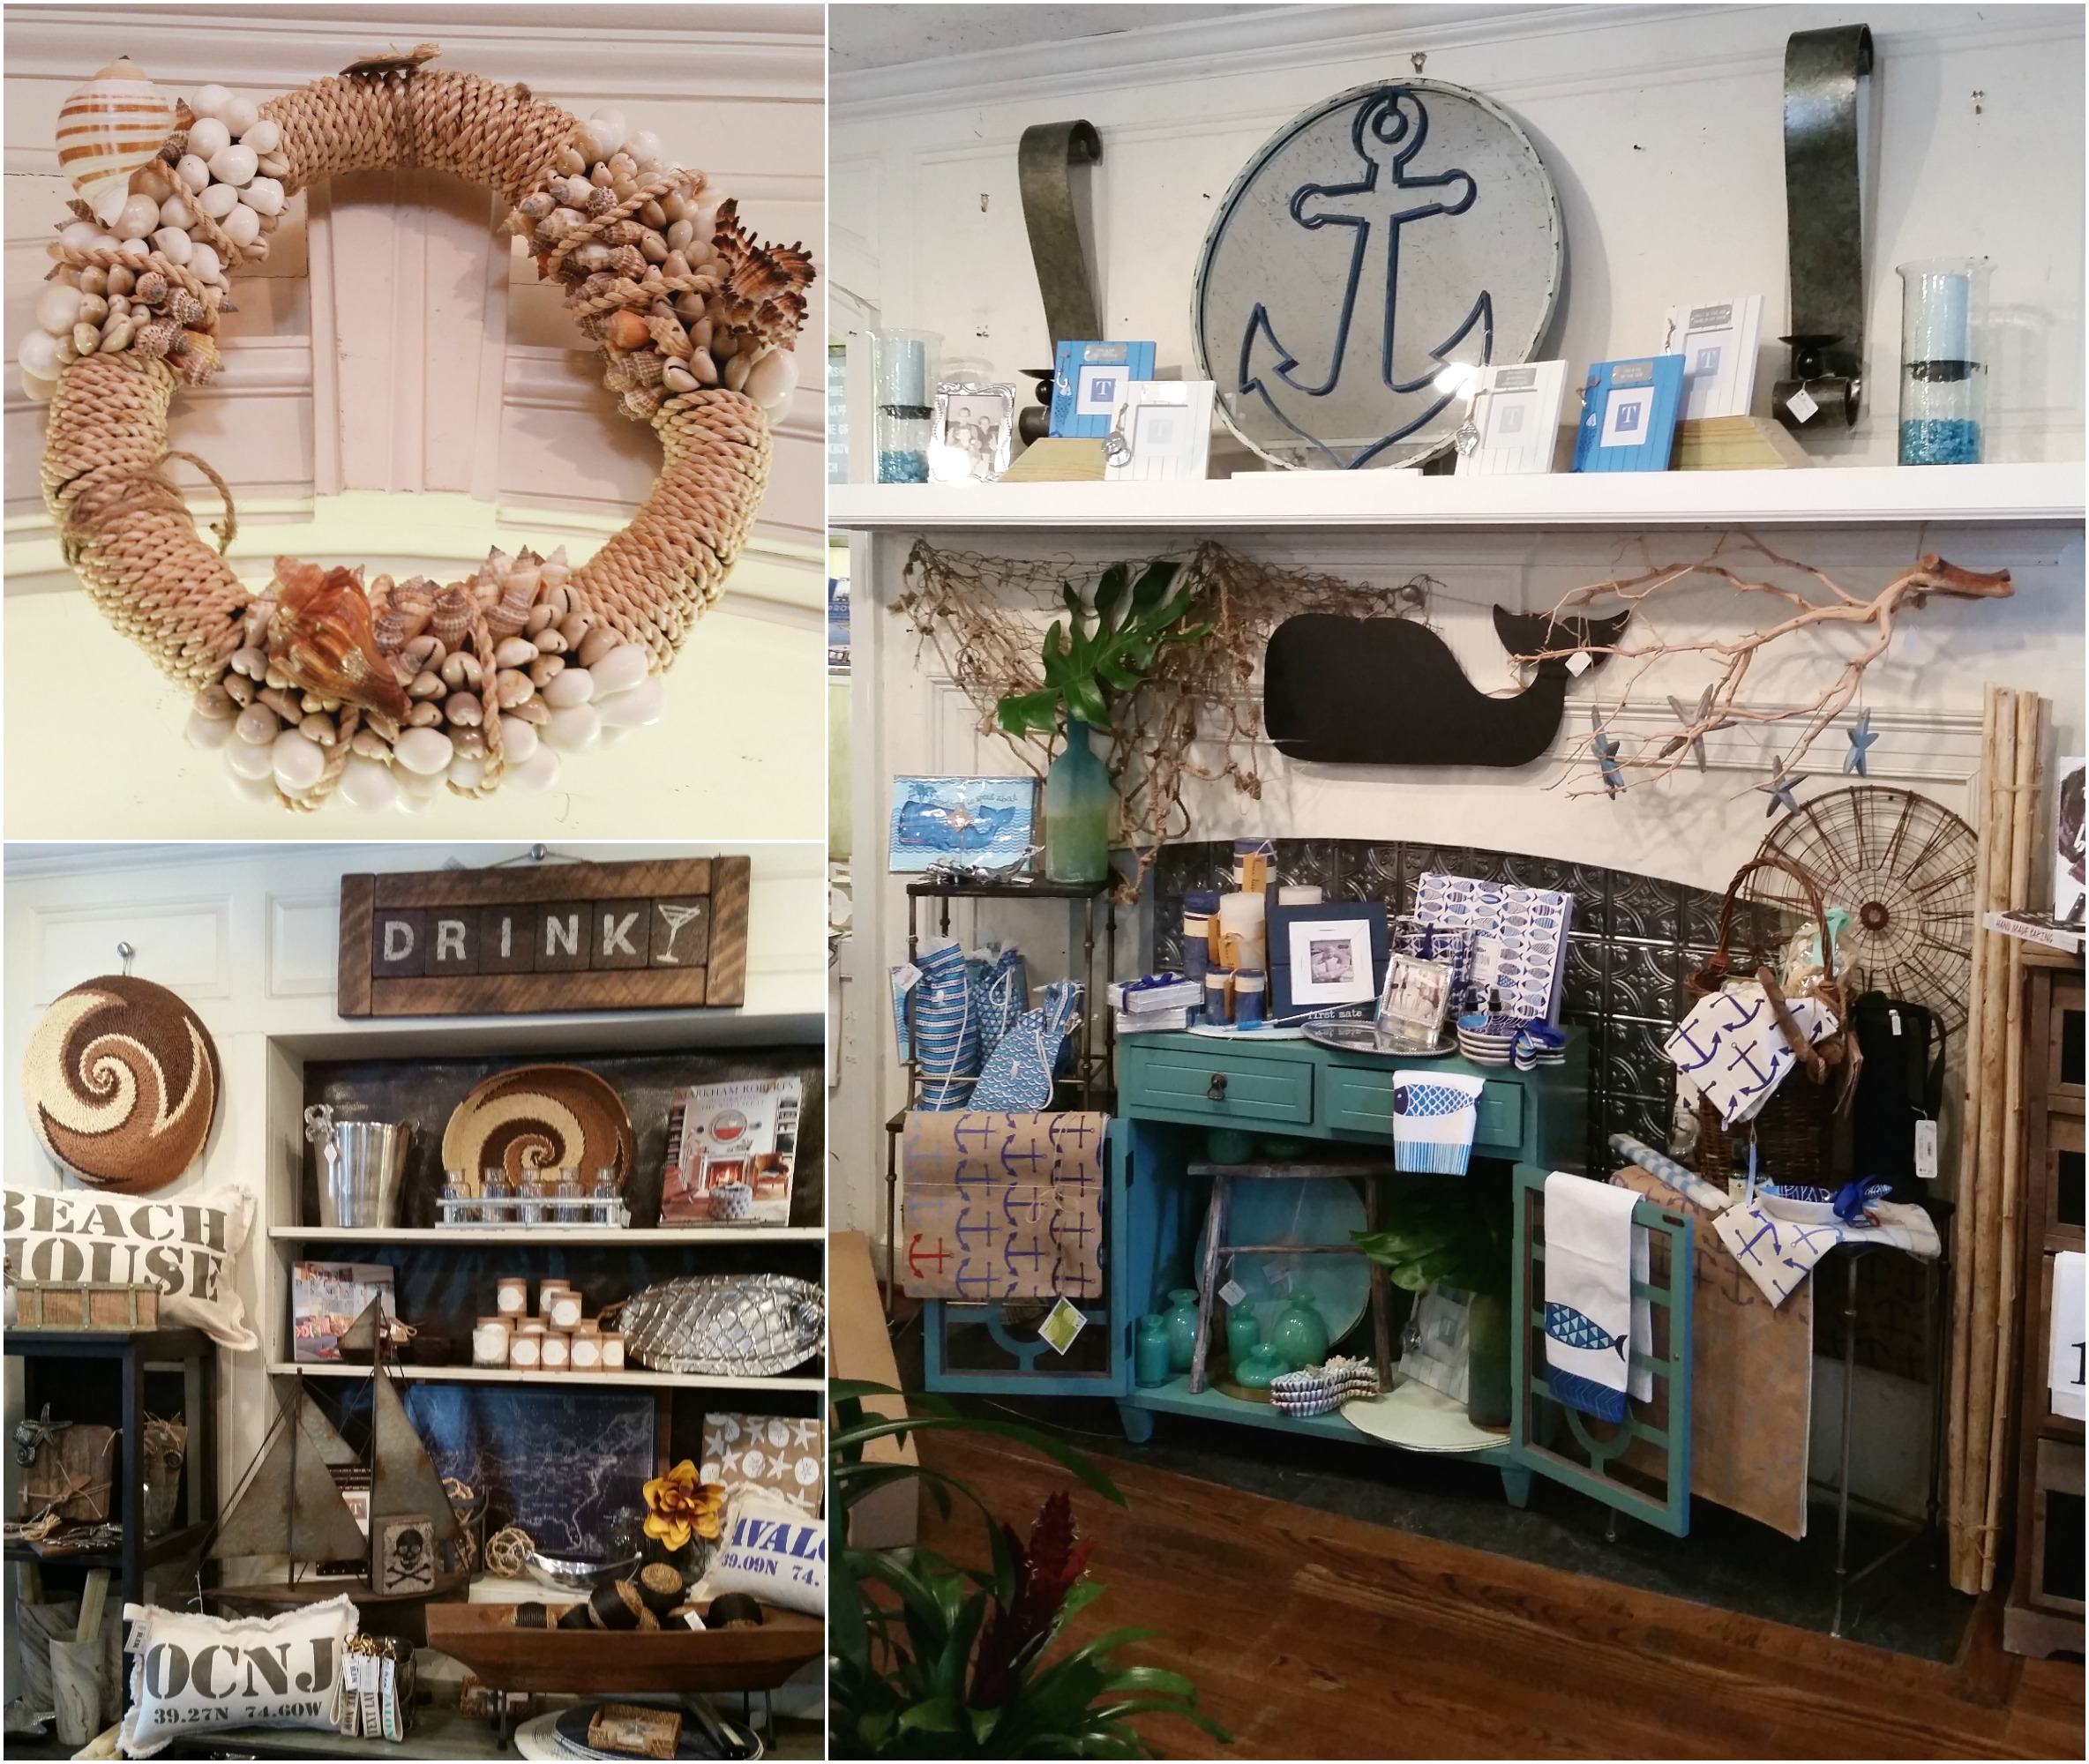 Anchors Away! Set sail with nautical decor from mirrors and serving trays to placemats and picture frames, we have everything to update your beach home just in time for Memorial Day!